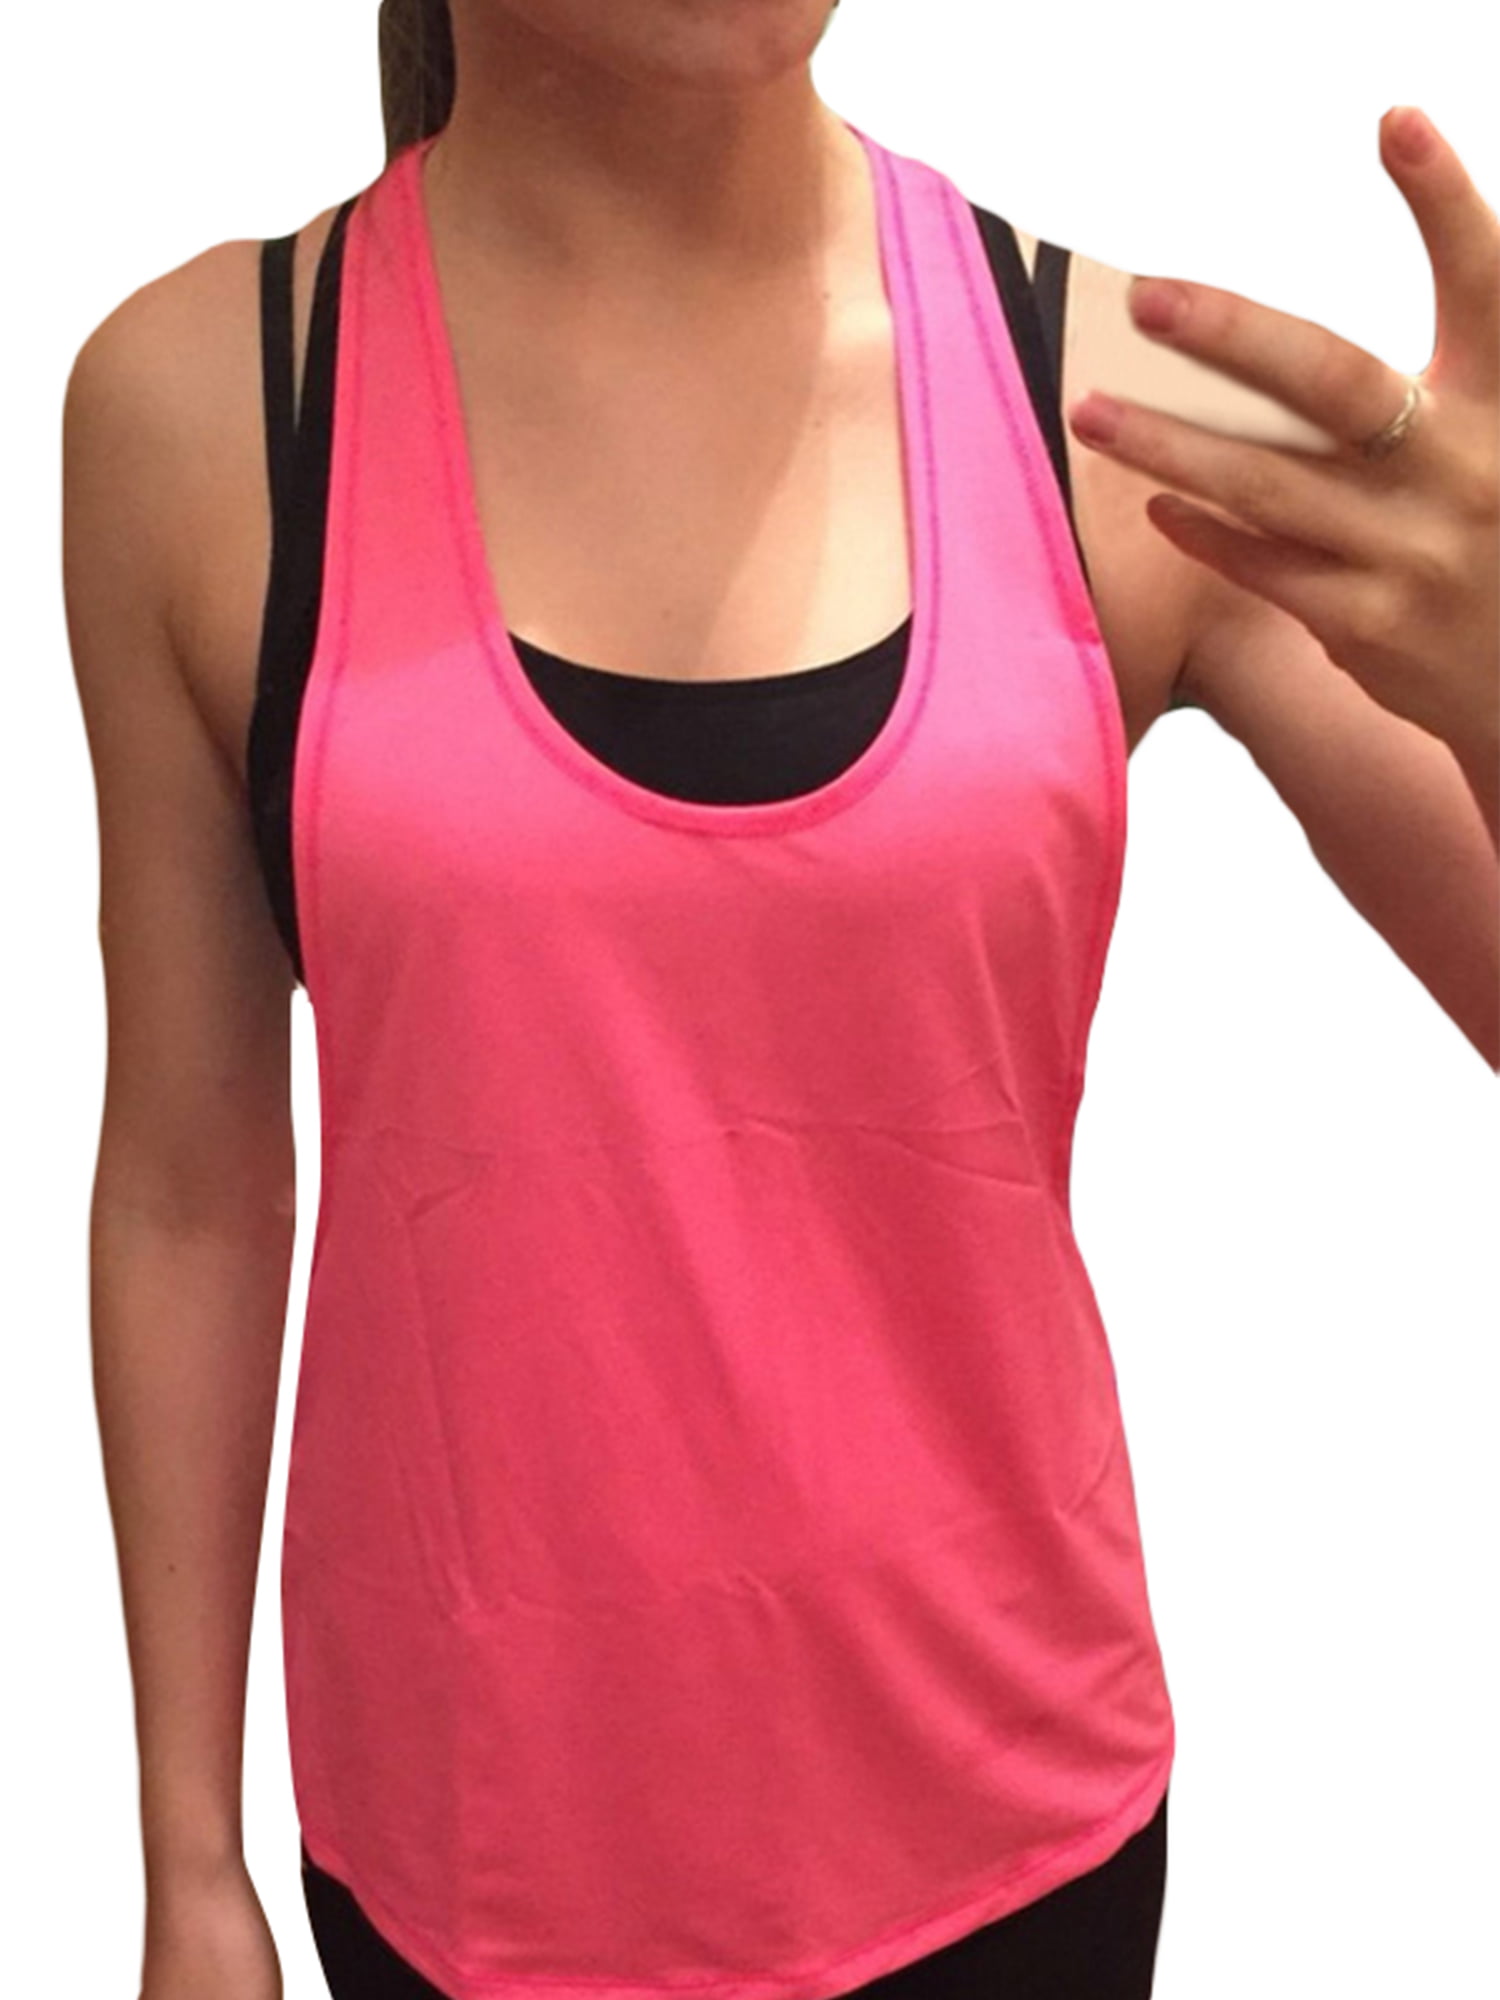 Women Sleeveless Loose Sports Vest Fitness Gym Yoga Workout Tank Tops Fit Blouse